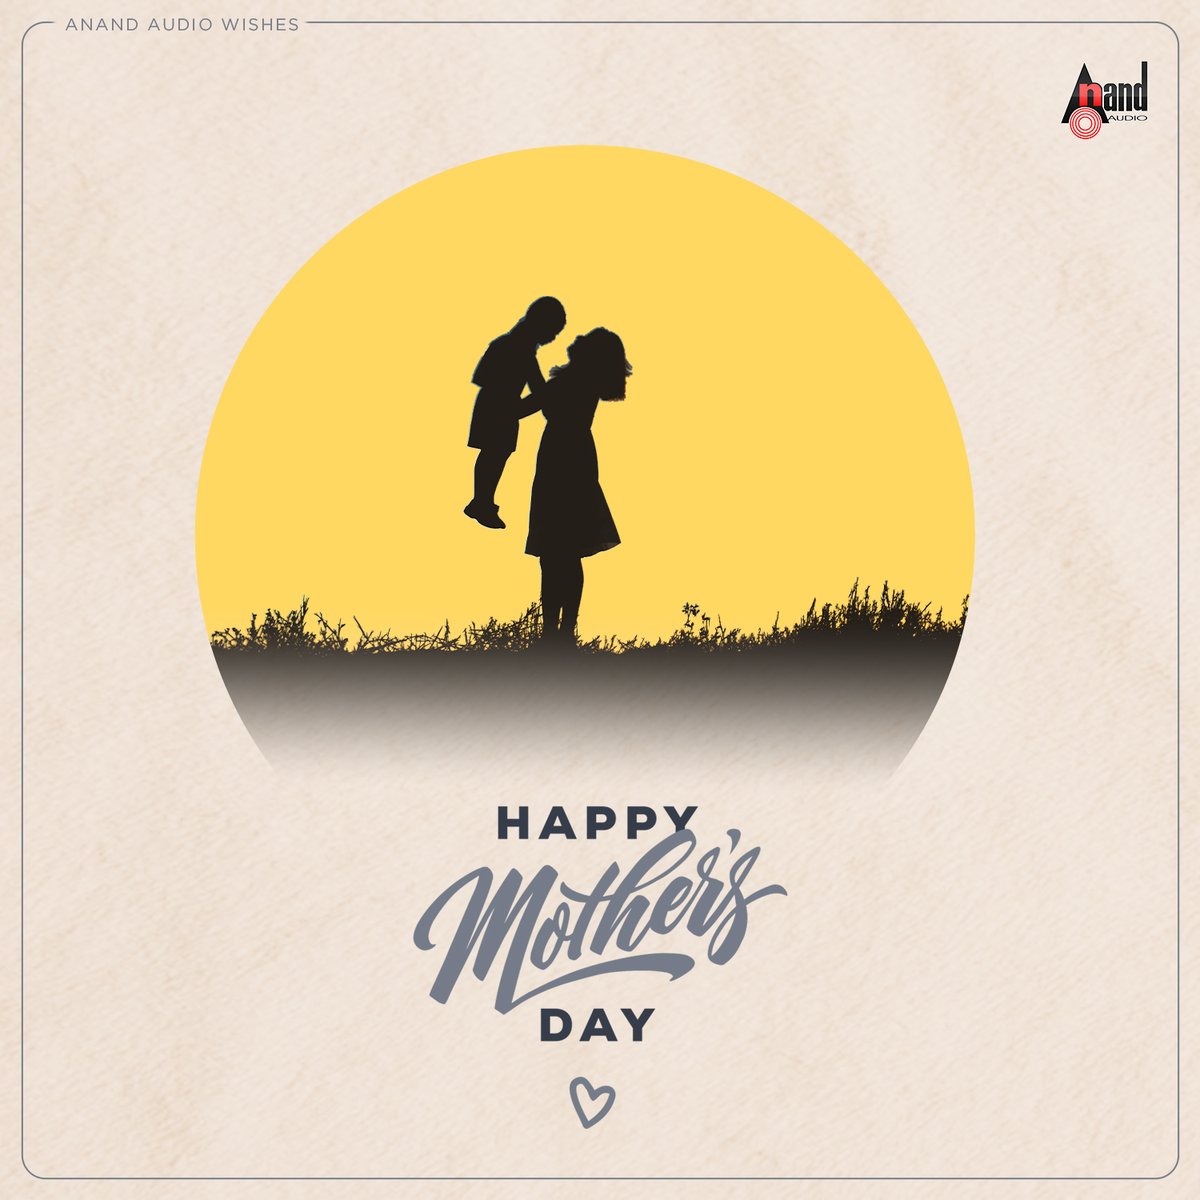 On This Special Day Join Us In Wishing All The Super Mommys A Very Happy Mother's Day. The One Who Showcase All Her Unconditional Love With Purest Heart 💝🫶 💐 shorturl.at/csvB5 #happymothersday #mothersday2024 #MothersDay #AnandAudio @aanandaaudio